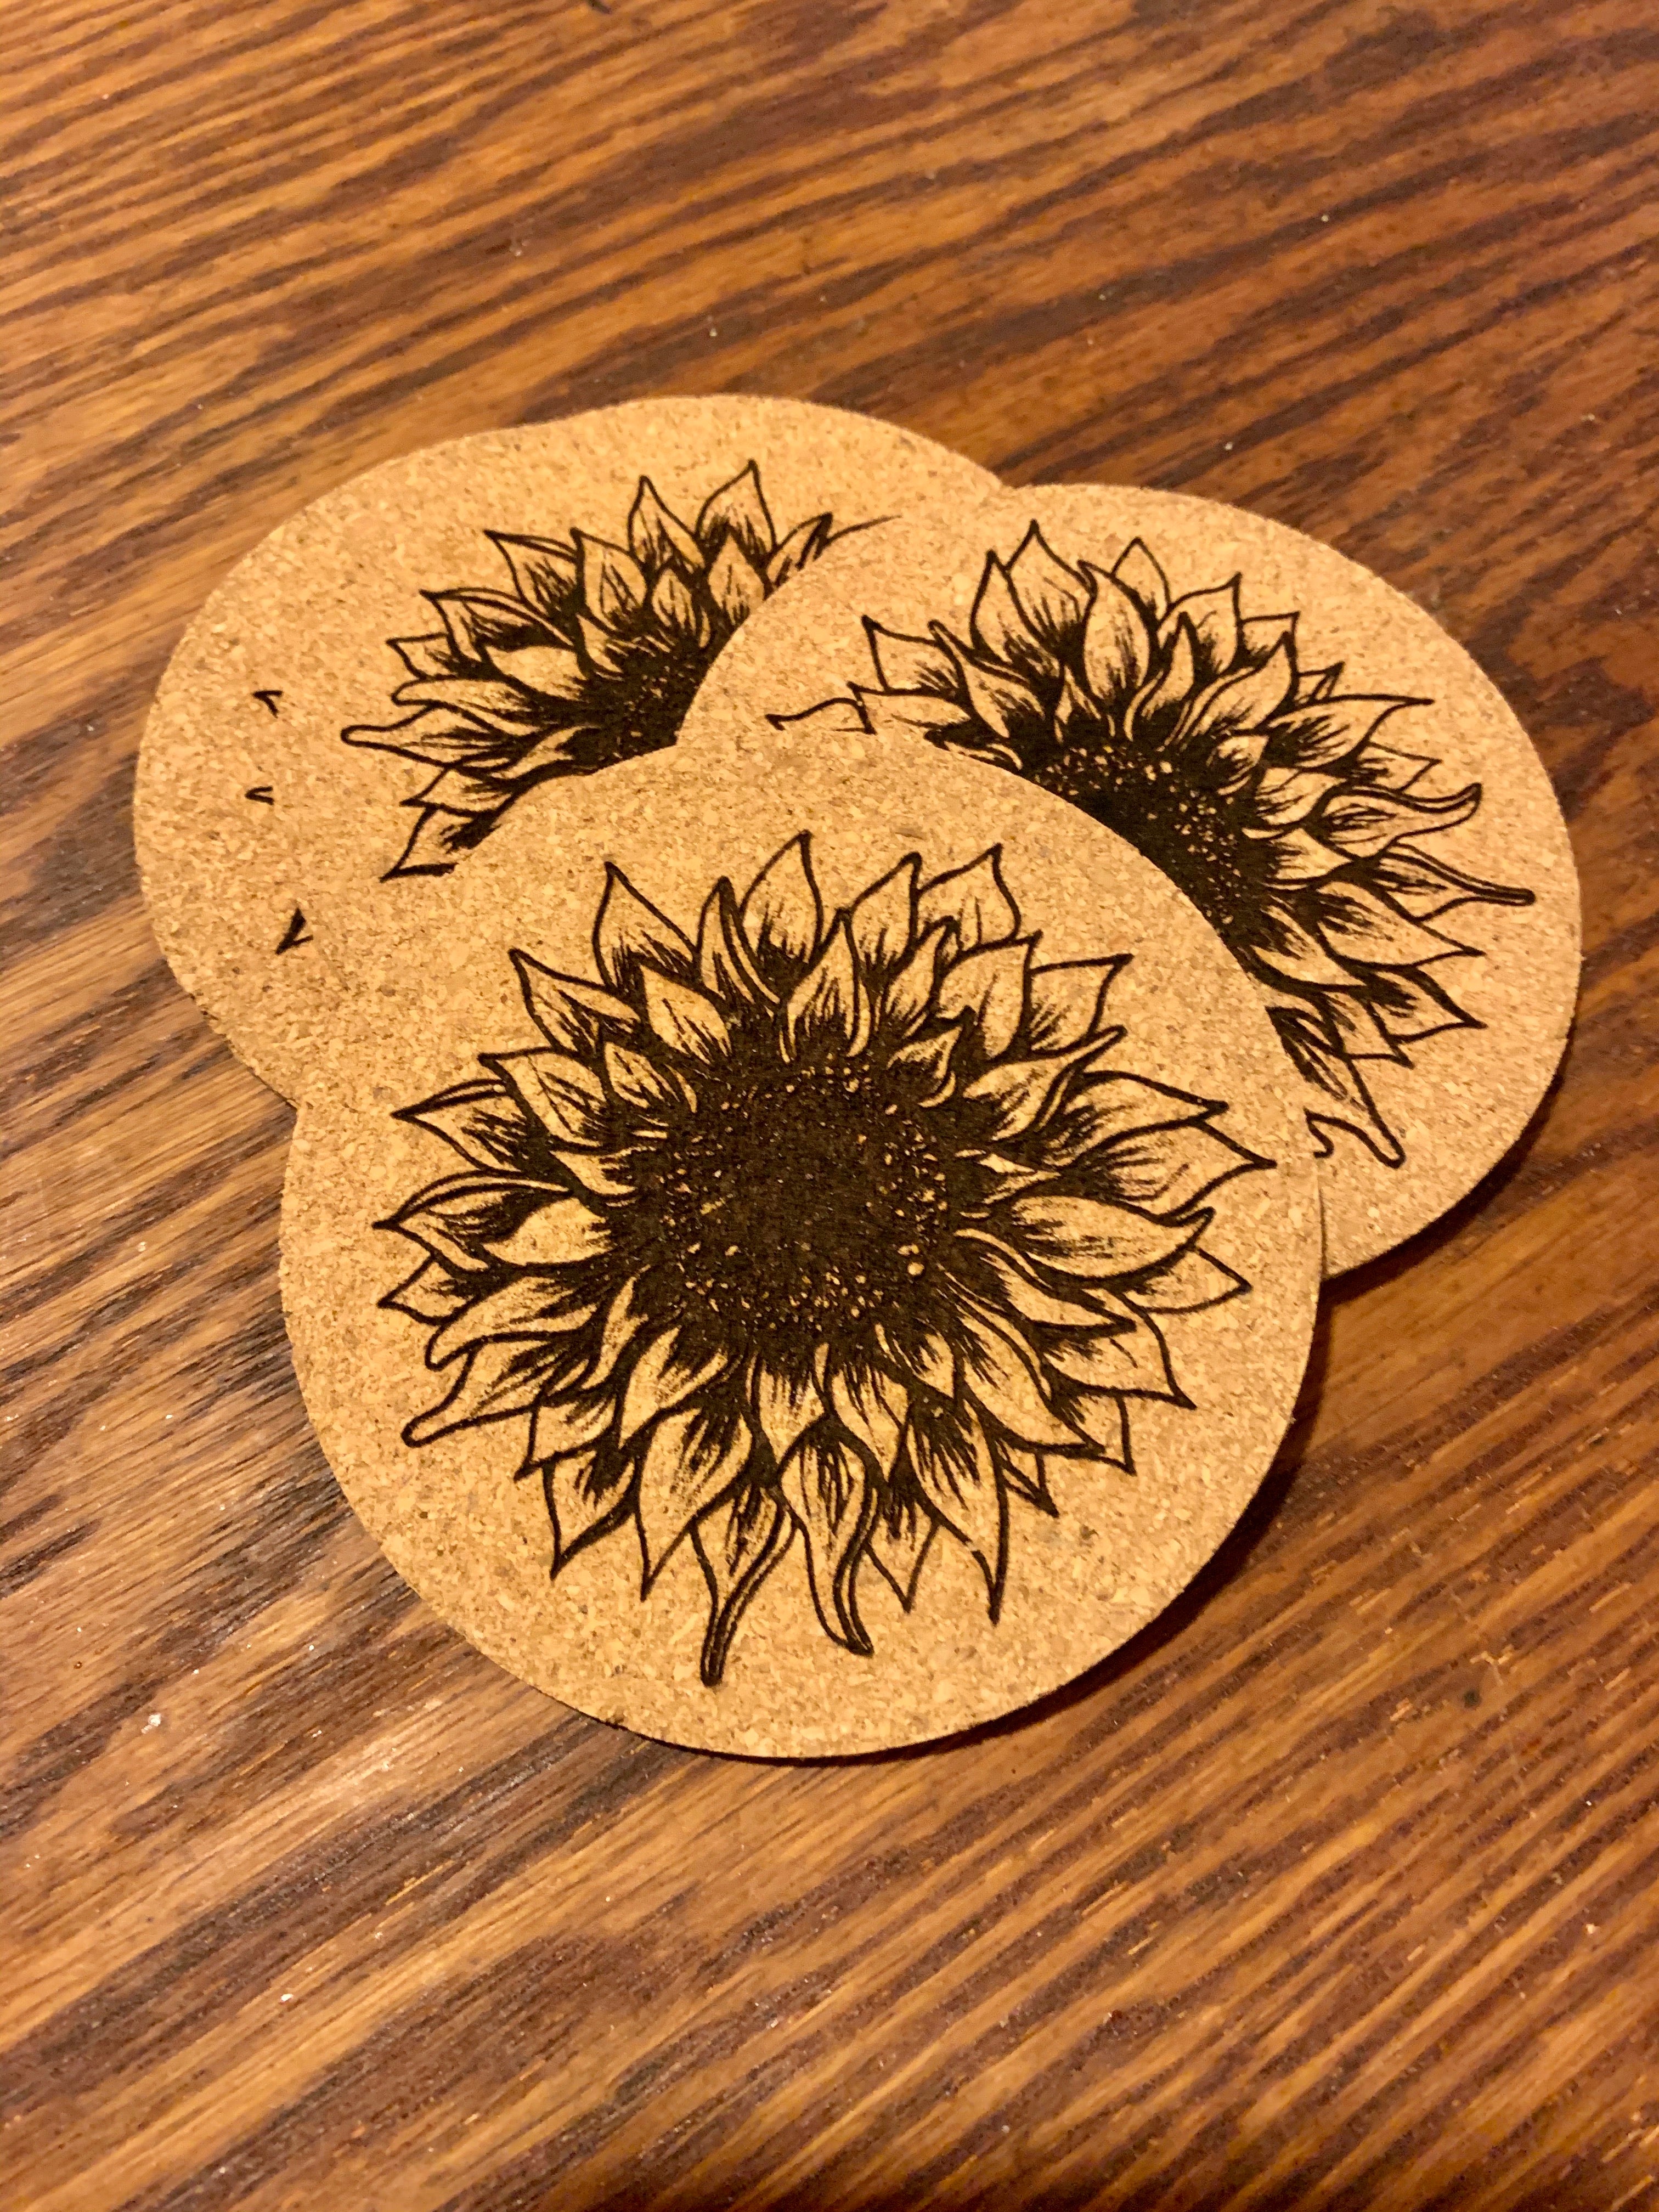 Turners Select Cork Coaster Insert, Projects